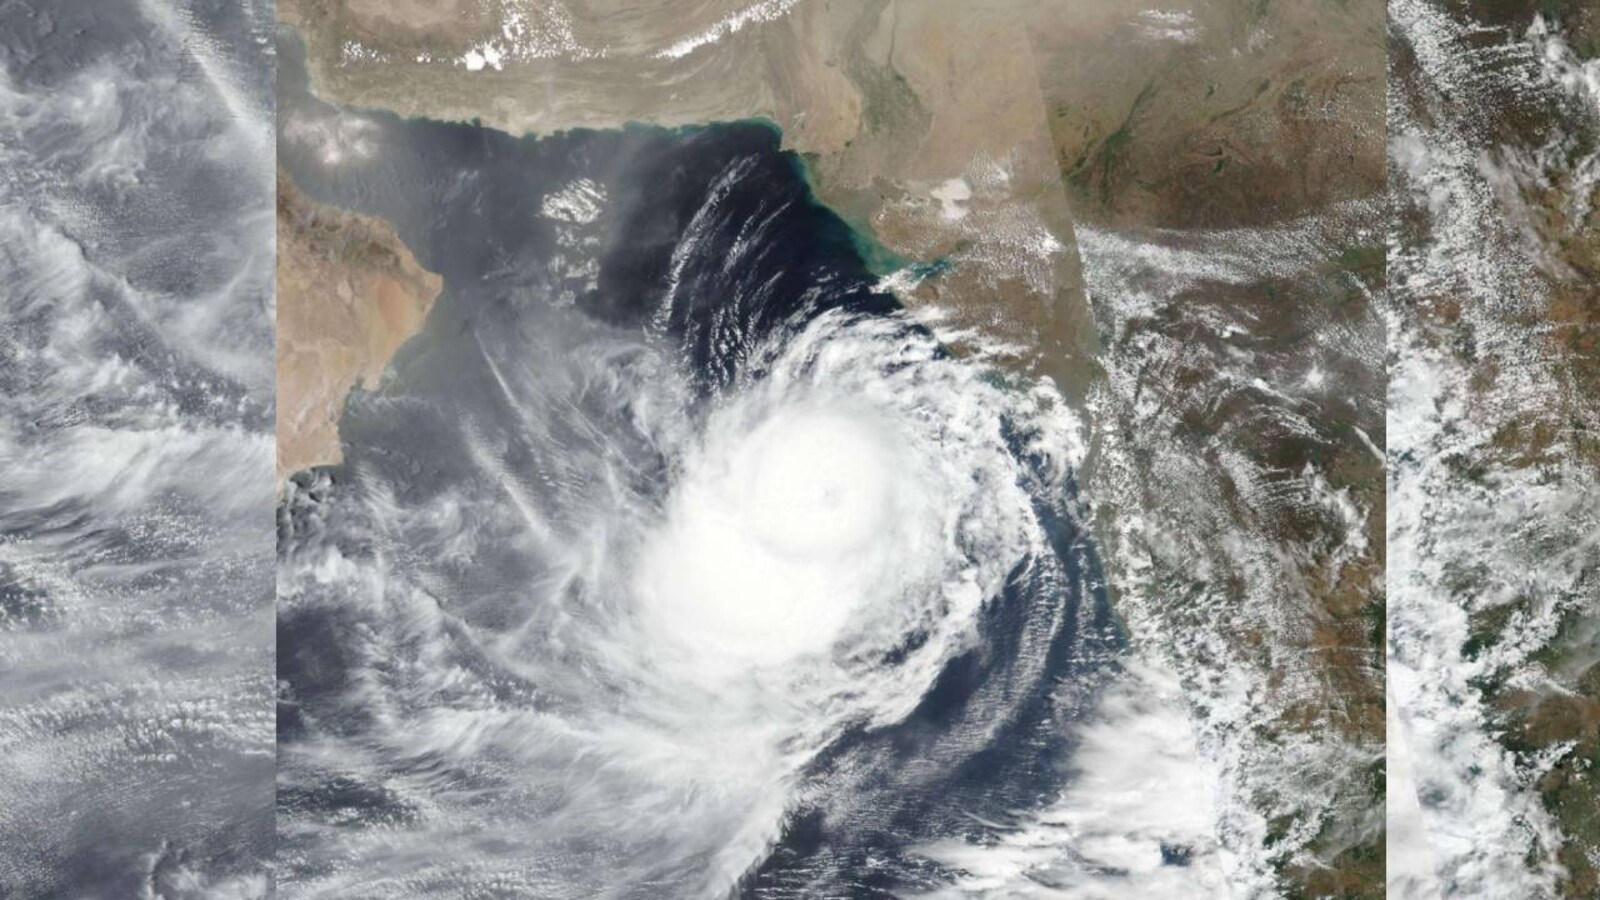 Tropical cyclones in the Arabian Sea: Why are they increasing